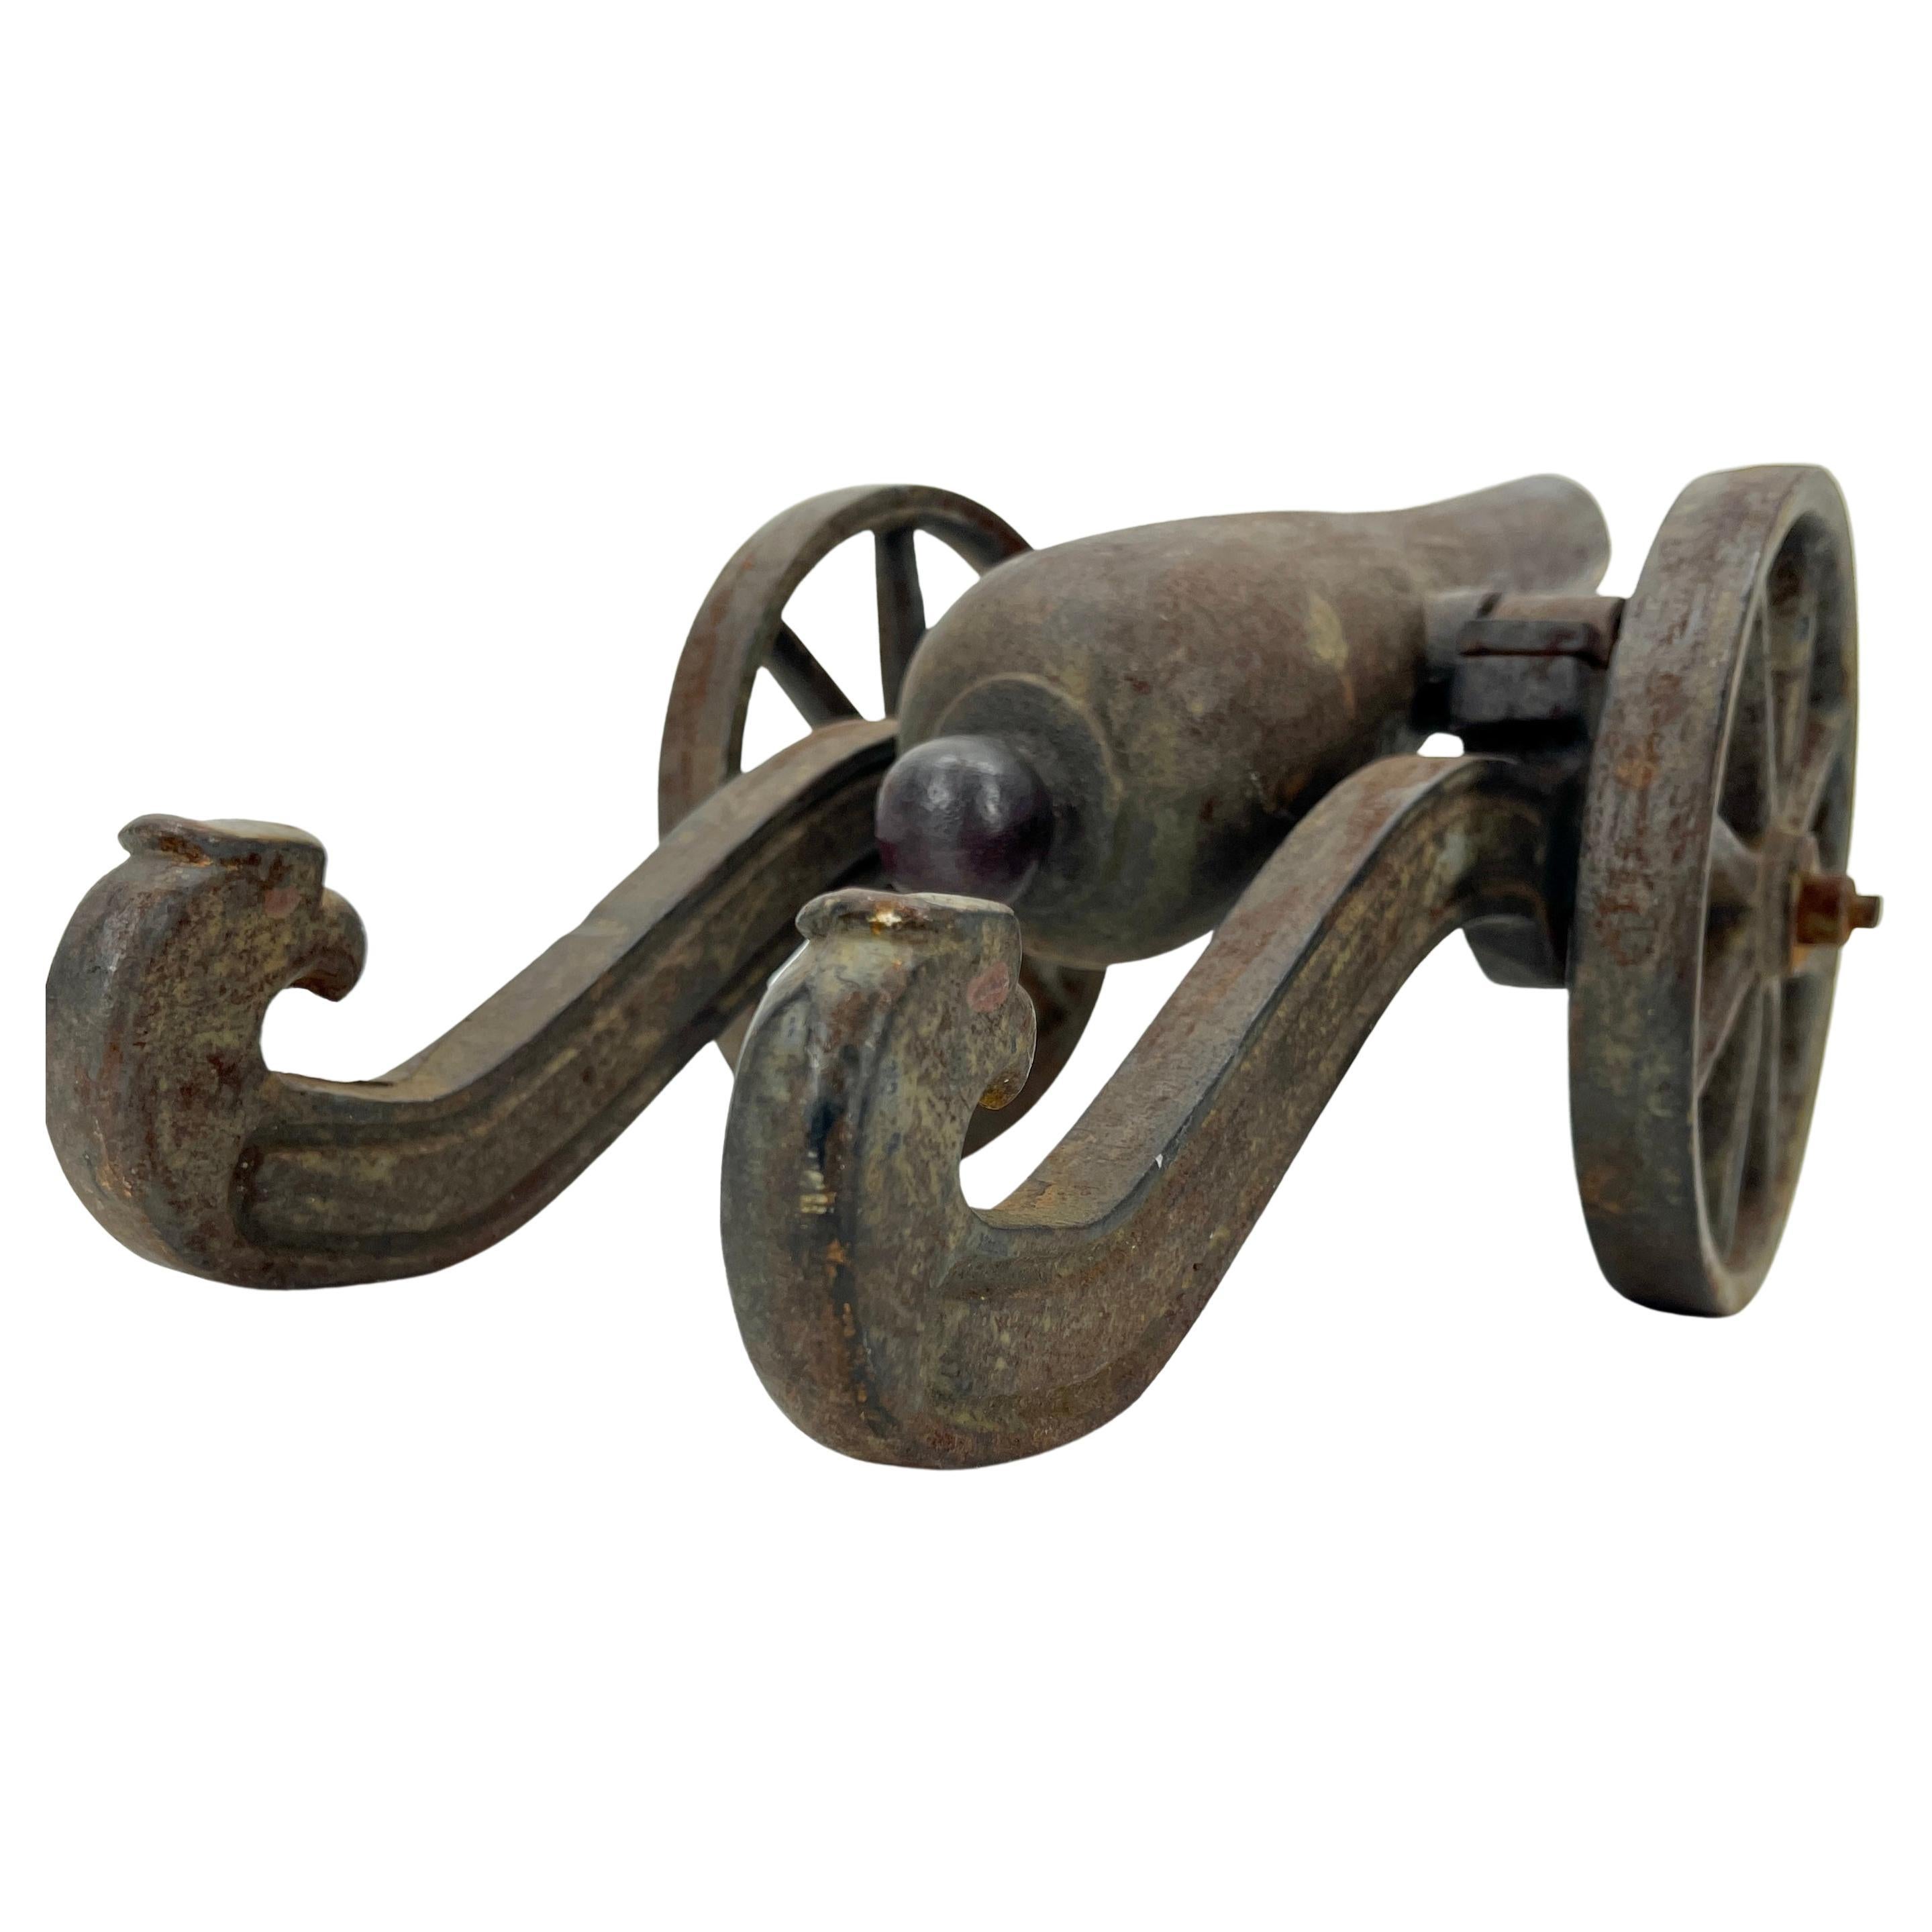 Miniature American Civil Style Iron Cannon on wheels with Eagle-head decoration.